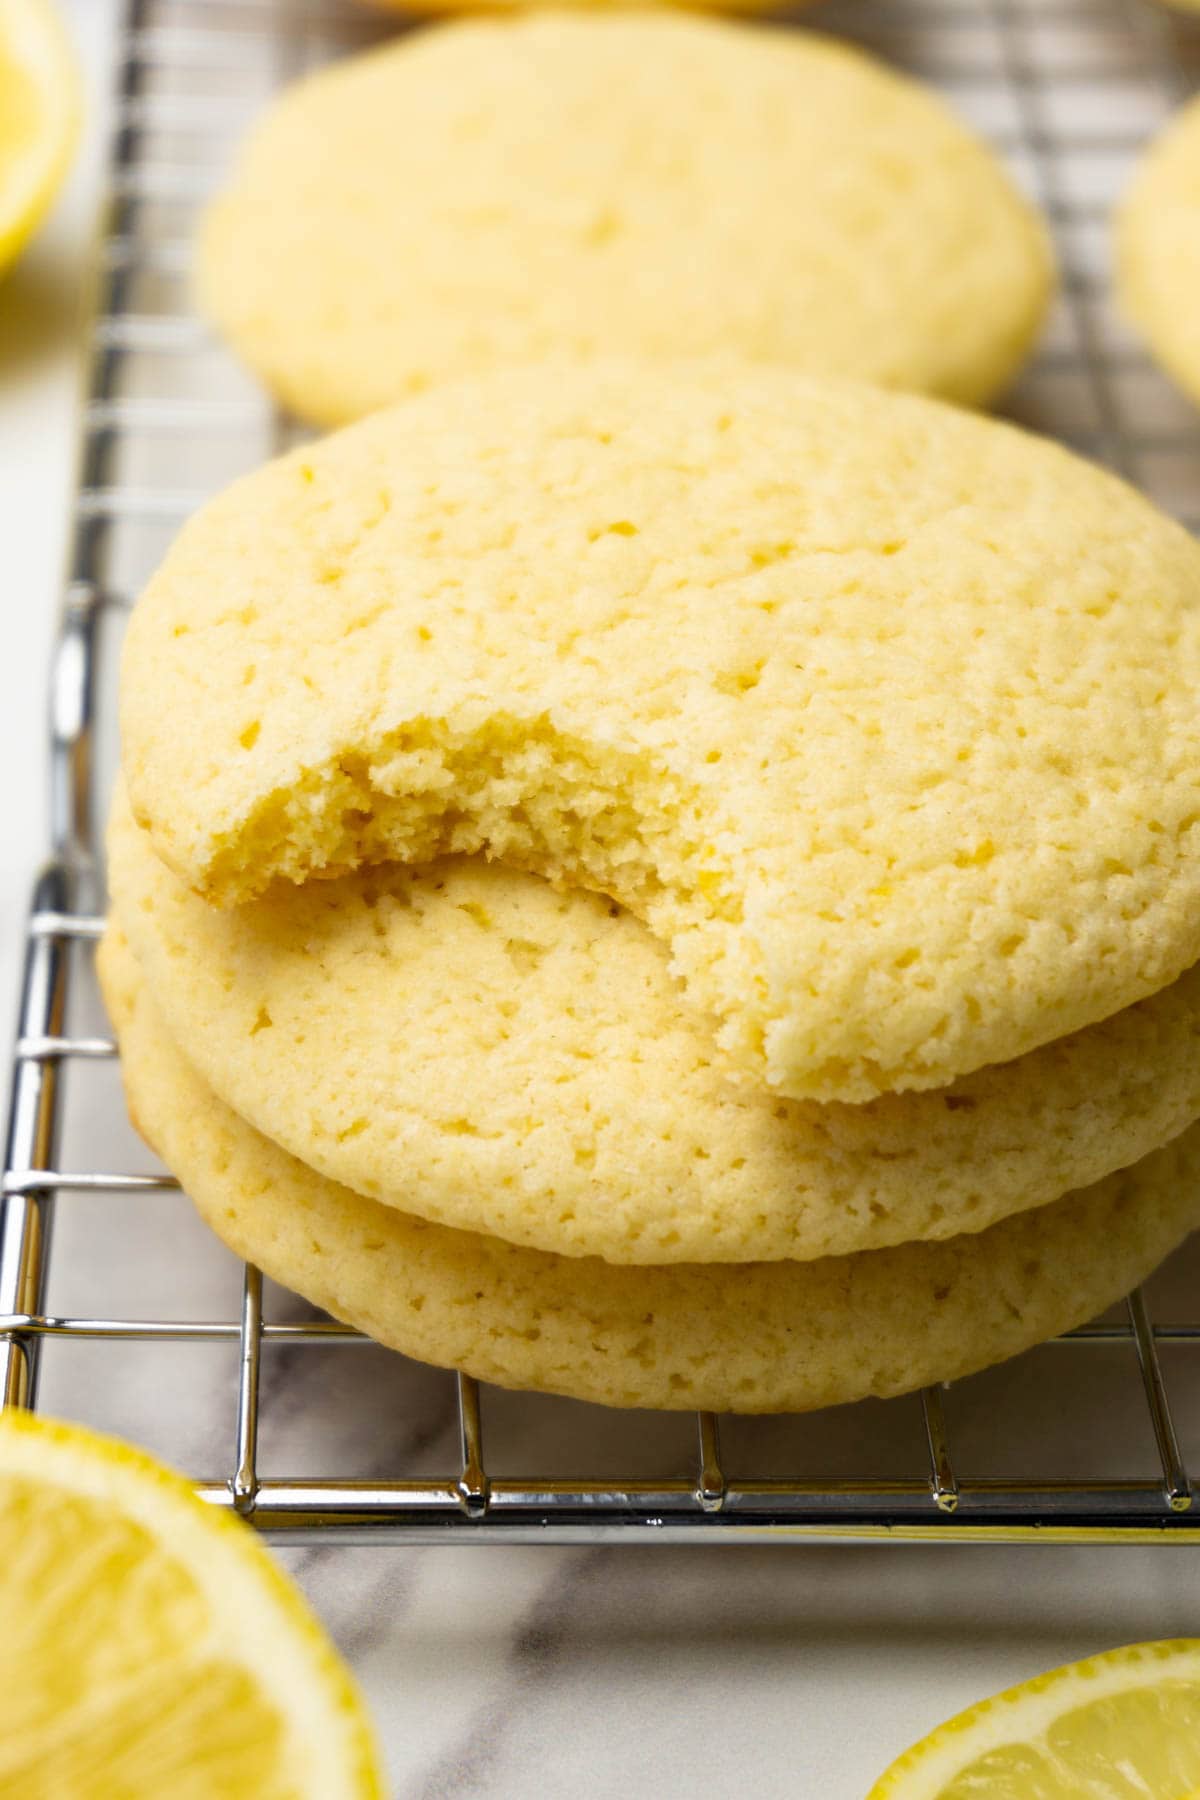 Three lemon cookies stacked on top of each other on a cooling rack, one bite taken from the top cookie.